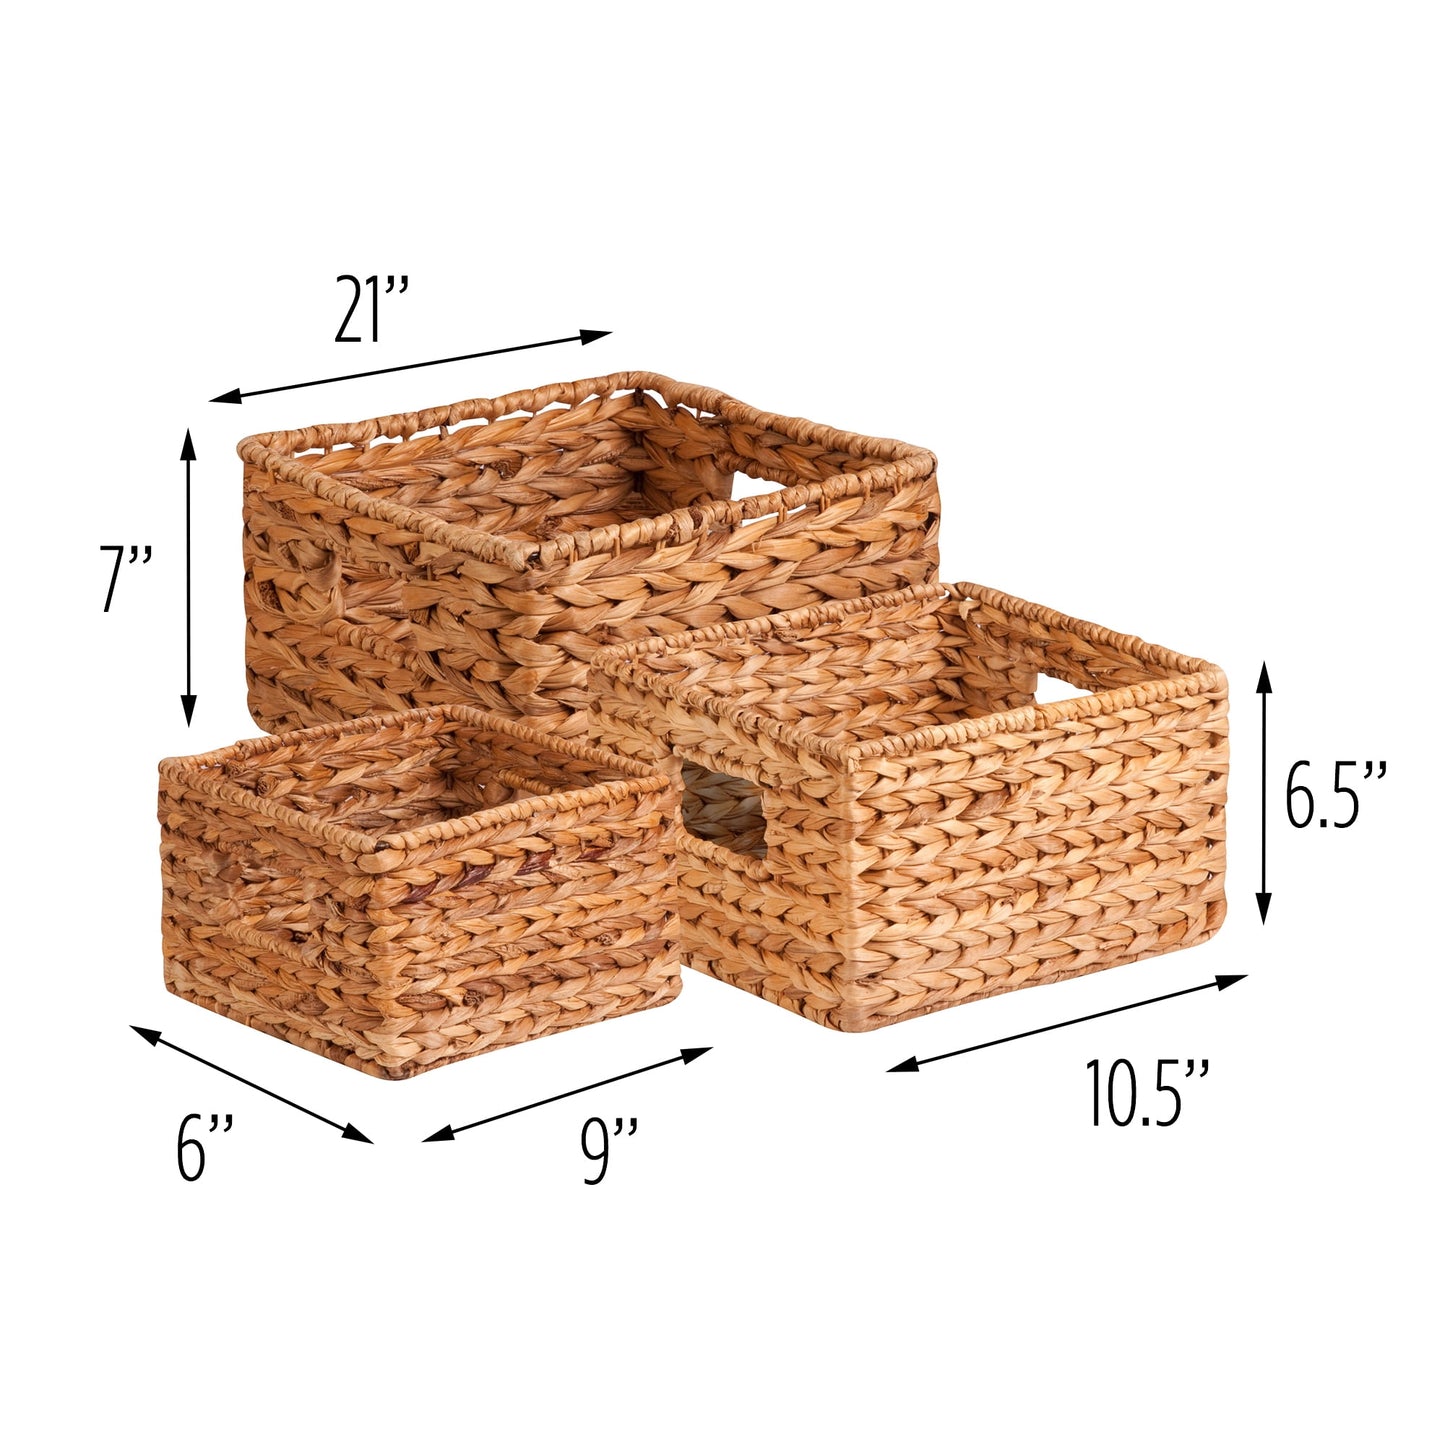 Honey-Can-Do Set of 3 Square Nesting Wicker Baskets with Handles, Natural